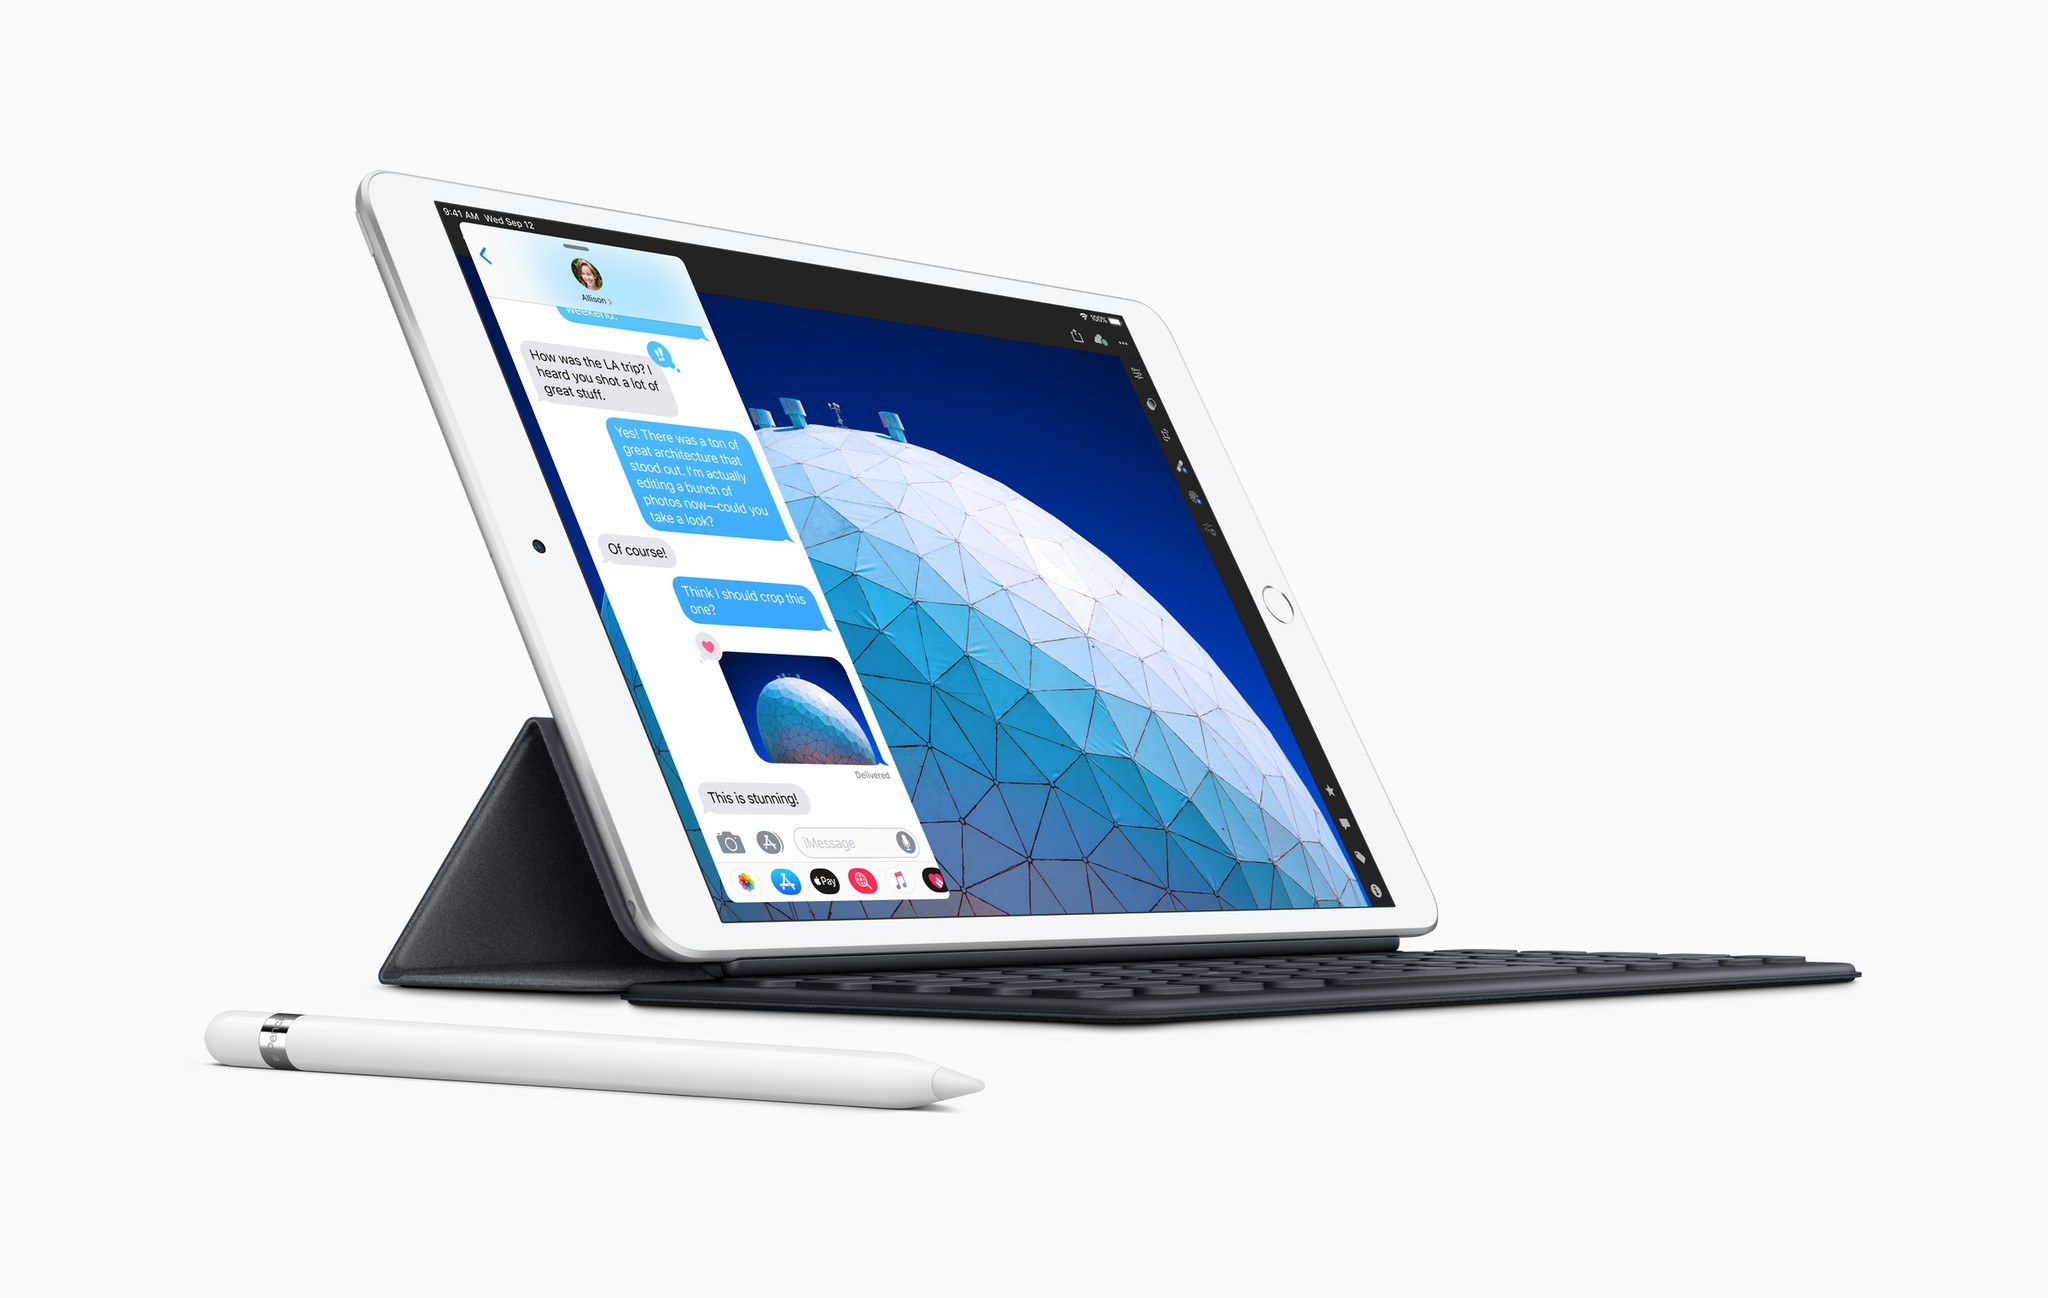 iPad Air 3 vs 10.5-inch iPad Pro: Which should you buy? | iMore